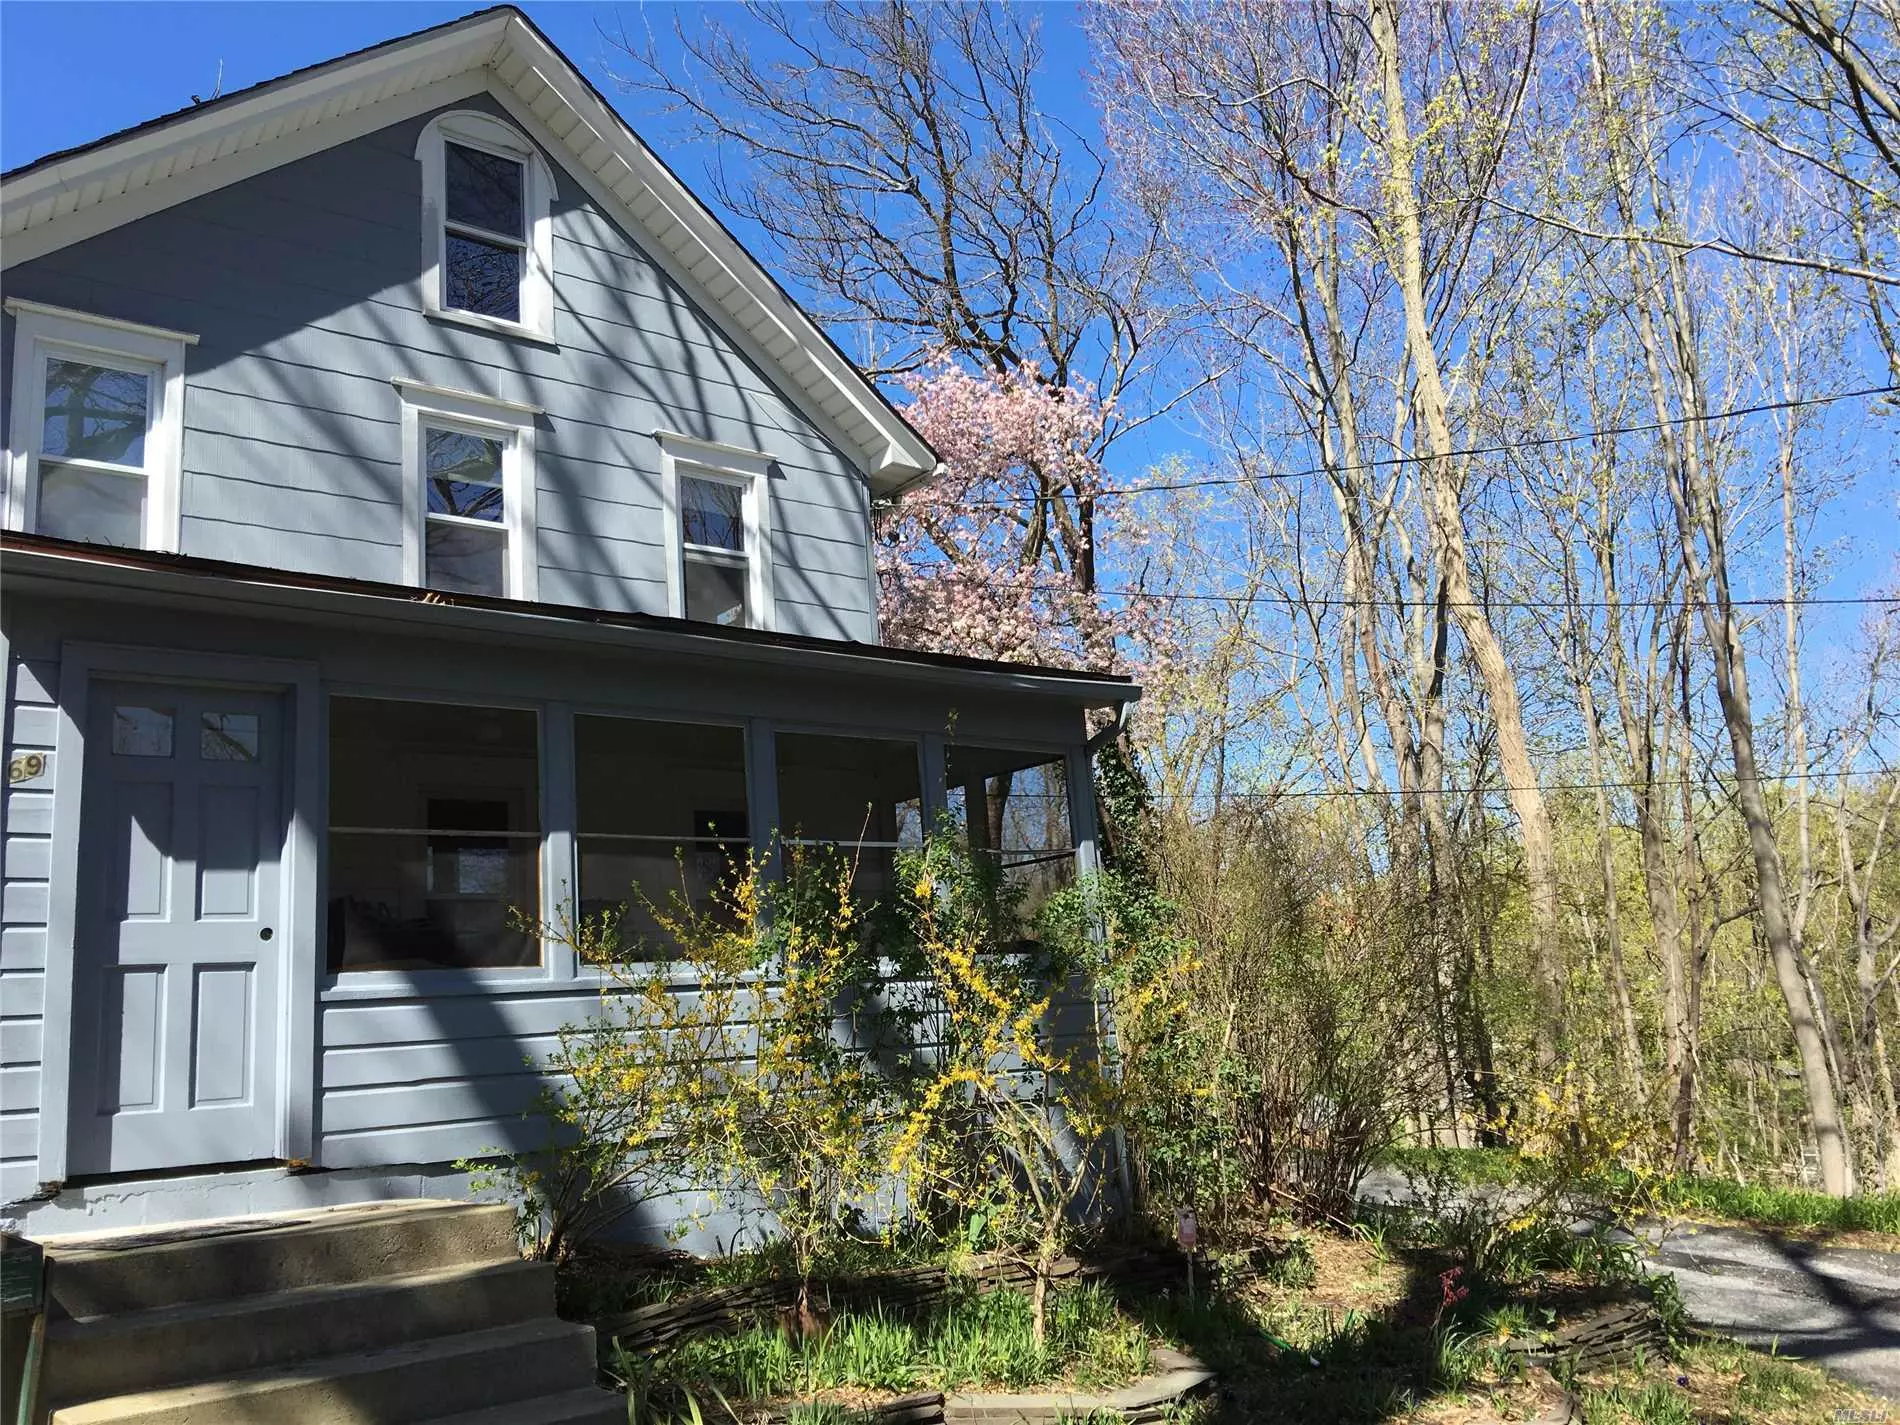 Historic Home On Large 1 + Acre Property. Property Needs TLC. Close To Stony Brook University, Frank Melville Park. West Meadow Beach, Stony Brook Village. A Wonderful Place To Live. Upgrade 200 AMP Electric - Upgrade Plumbing!